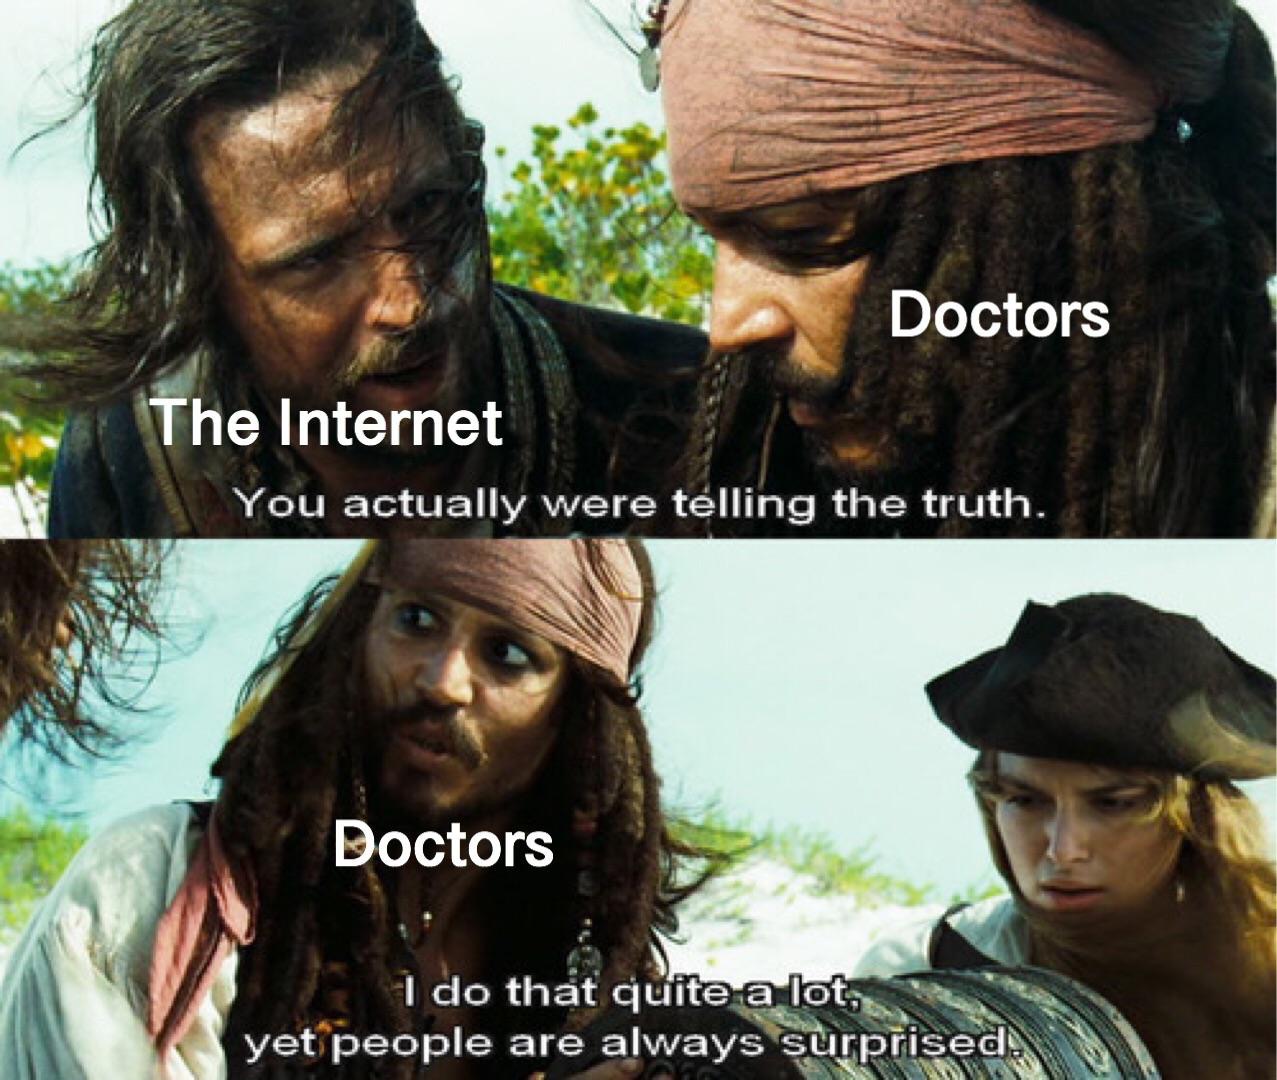 dank meme - funny movie quotes - Doctors The Internet You actually were telling the truth. Doctors I do that quite a lot, yet people are always surprised